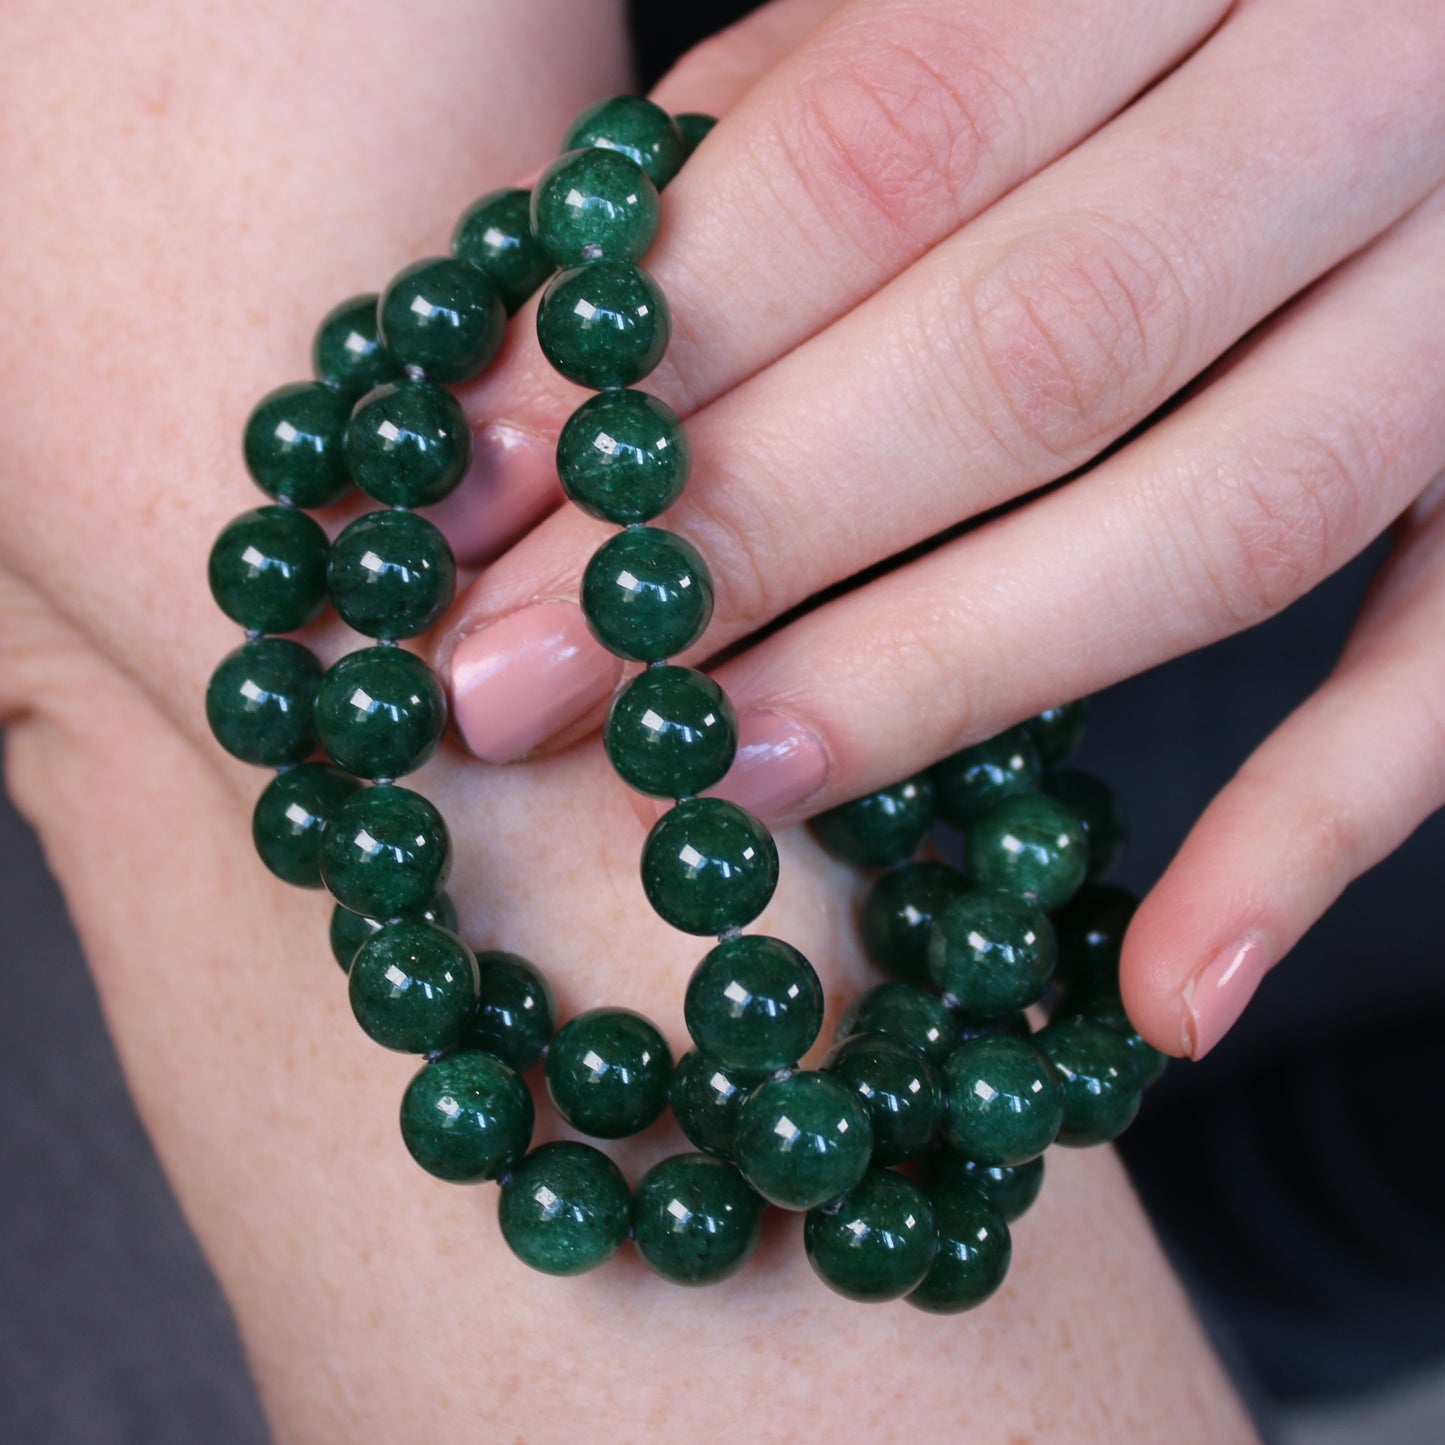 Crystal healing Dark Green Aventurine necklace known for strengthening and purifying organs being played on an arm